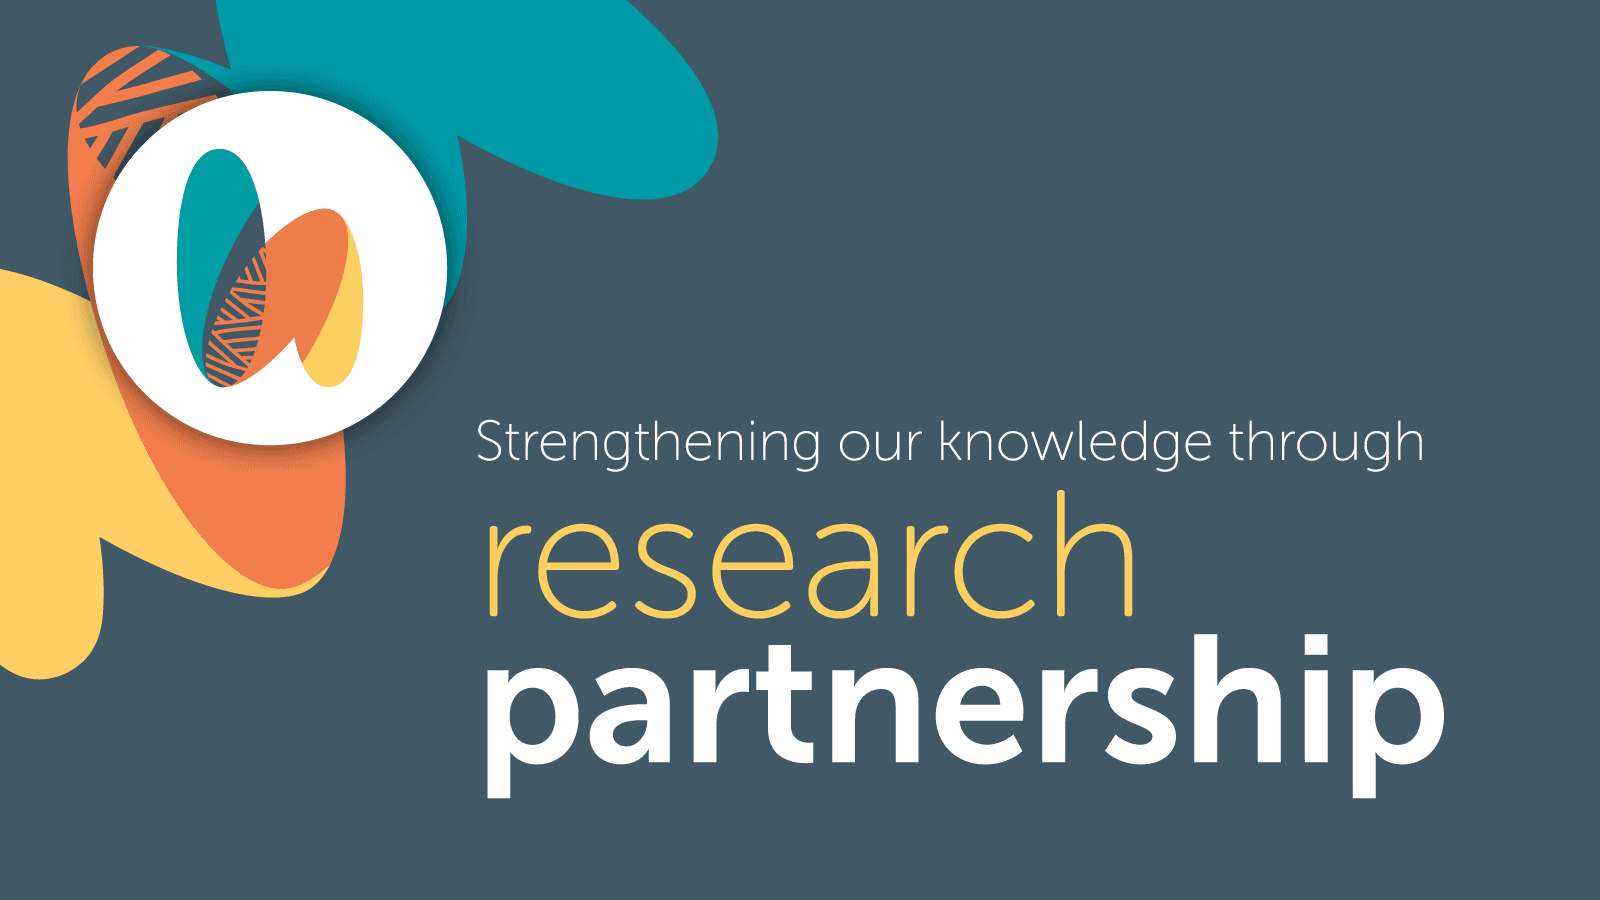 Strengthening our knowledge through research partnership